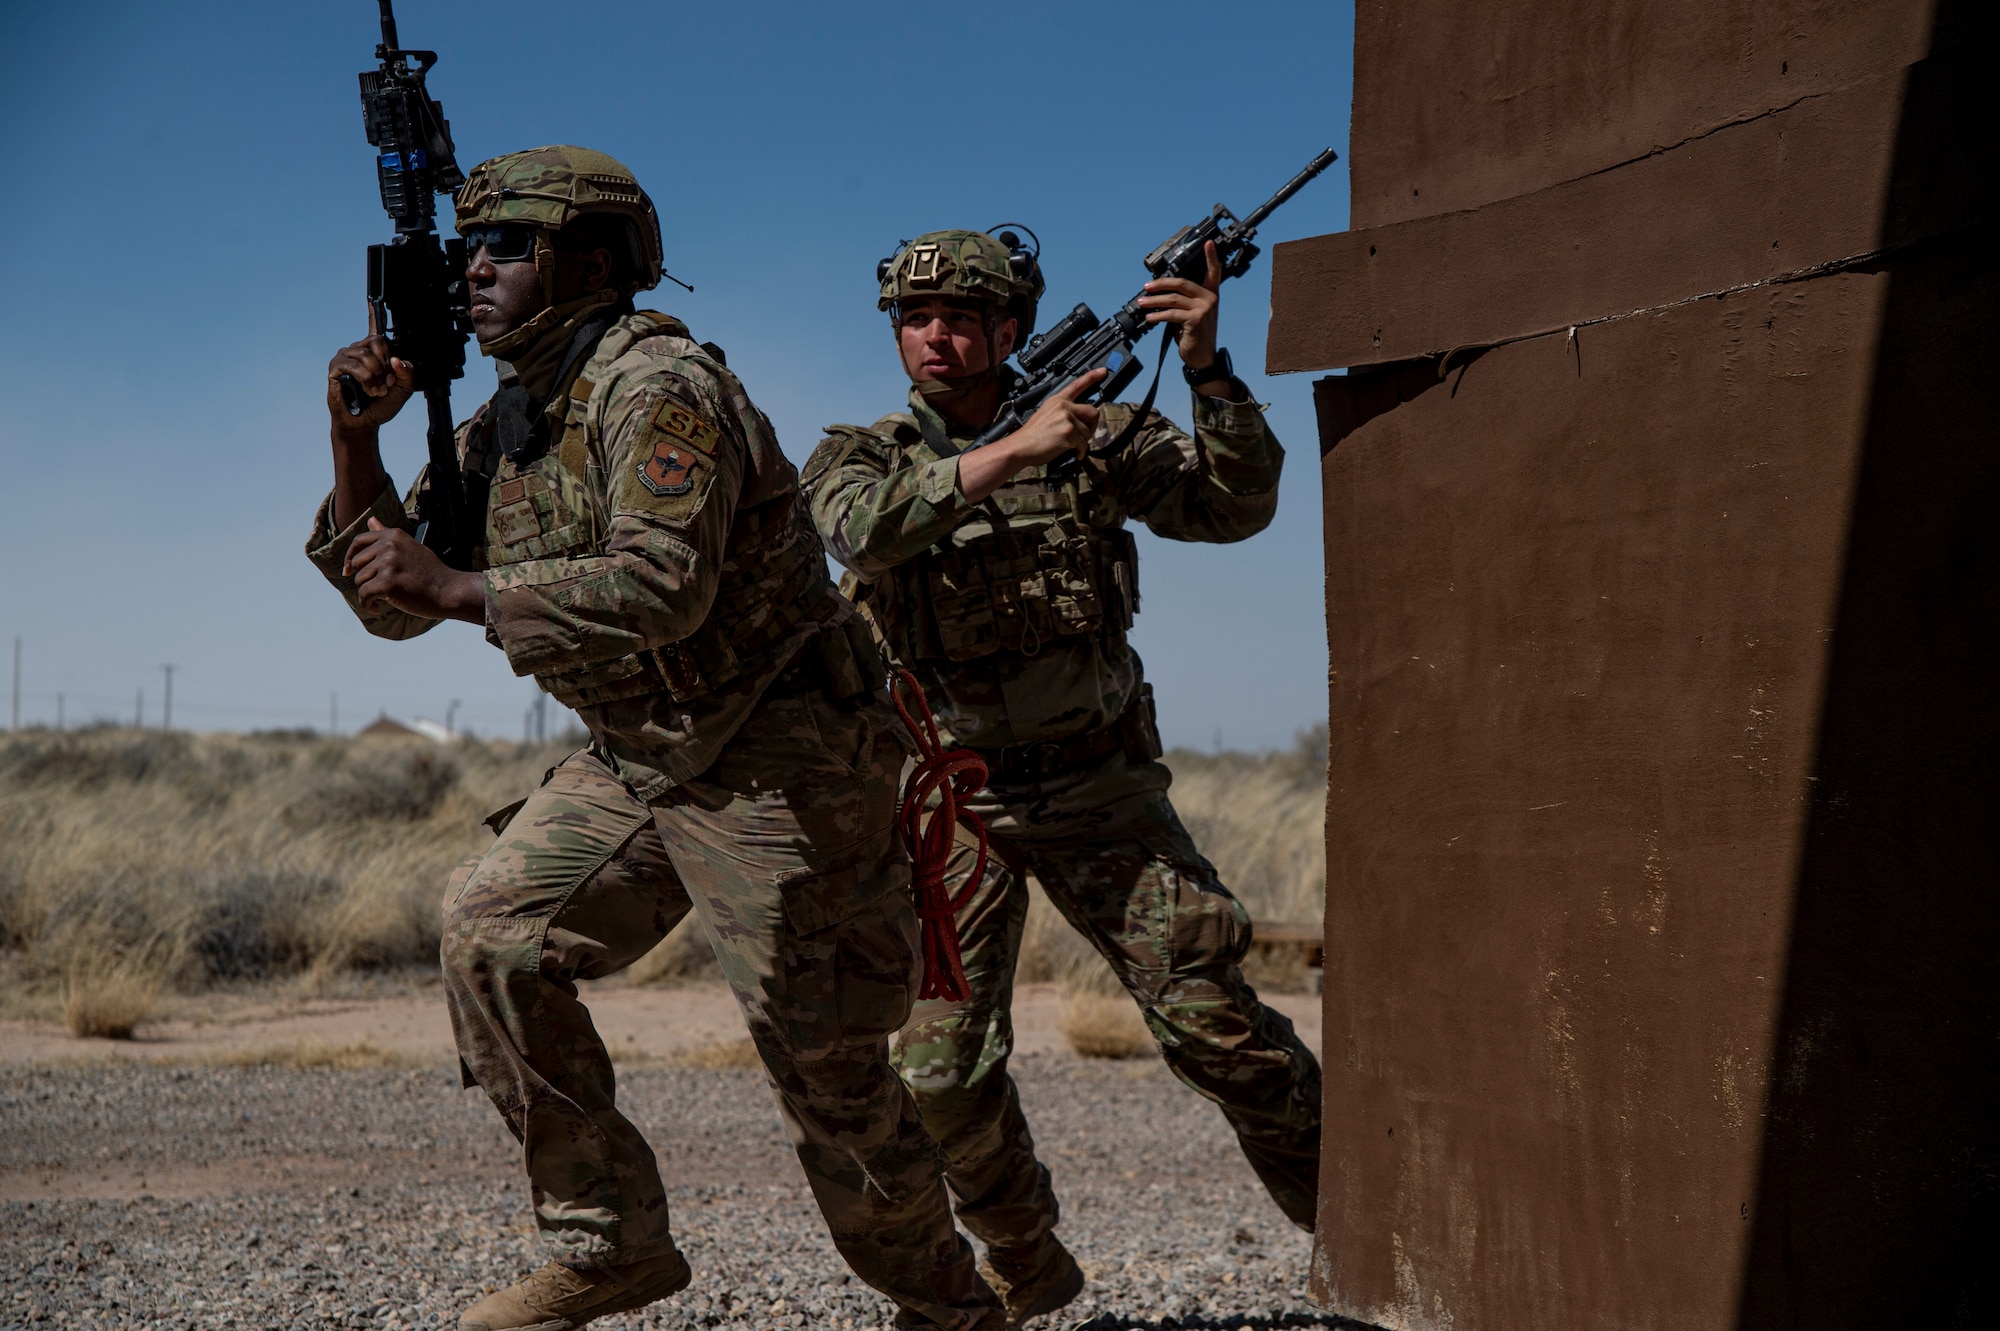 U.S. Air Force Senior Airman Aaron Fulmore, 49th Security Forces Squadron base defense operations center controller, left, and U.S. Air Force Senior Airman Constantino Starkey, 49th SFS patrolman, move to their next position after providing cover for their team in a small unit tactical movement exercise during the first-ever-ever Fire Team Leaders Course at Holloman Air Force Base, New Mexico, March 1, 2023. The course placed heavy emphasis on small-arms marksmanship fundamentals, mission planning, operations in urban environments, small unit tactics, and the overall ability to shoot, move and communicate. (U.S. Air Force photo by Senior Airman Antonio Salfran)